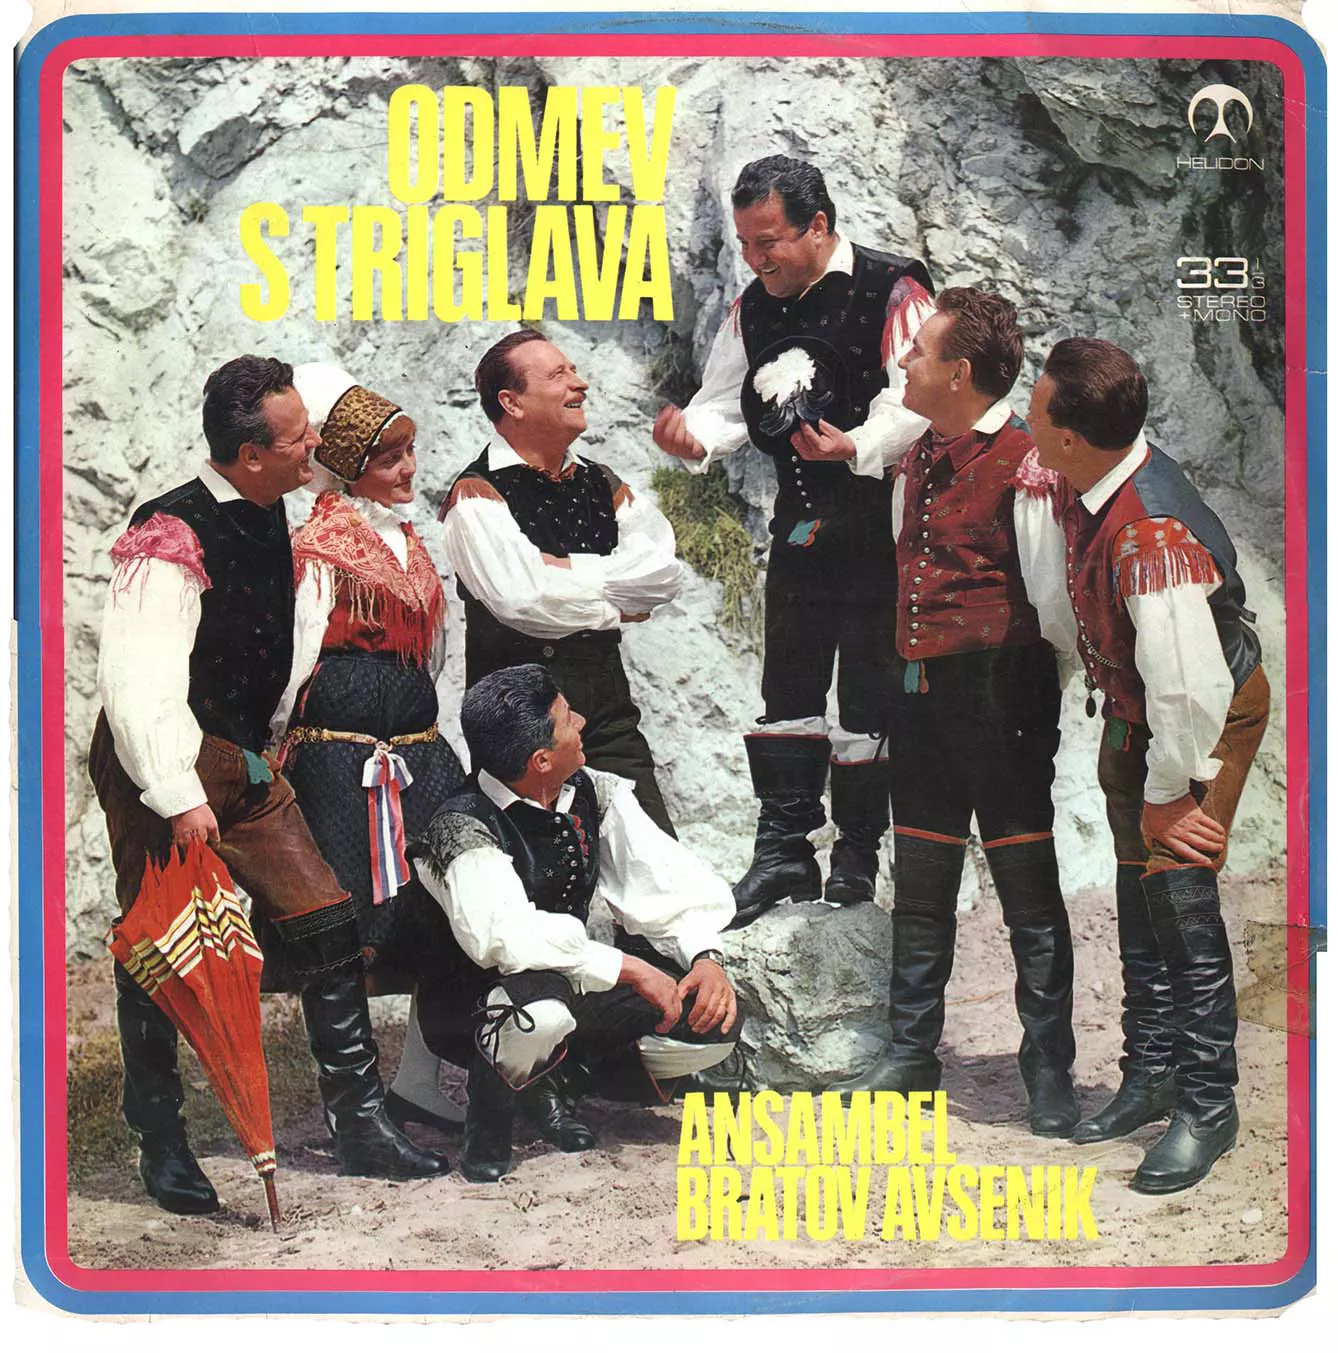 album cover from 1969